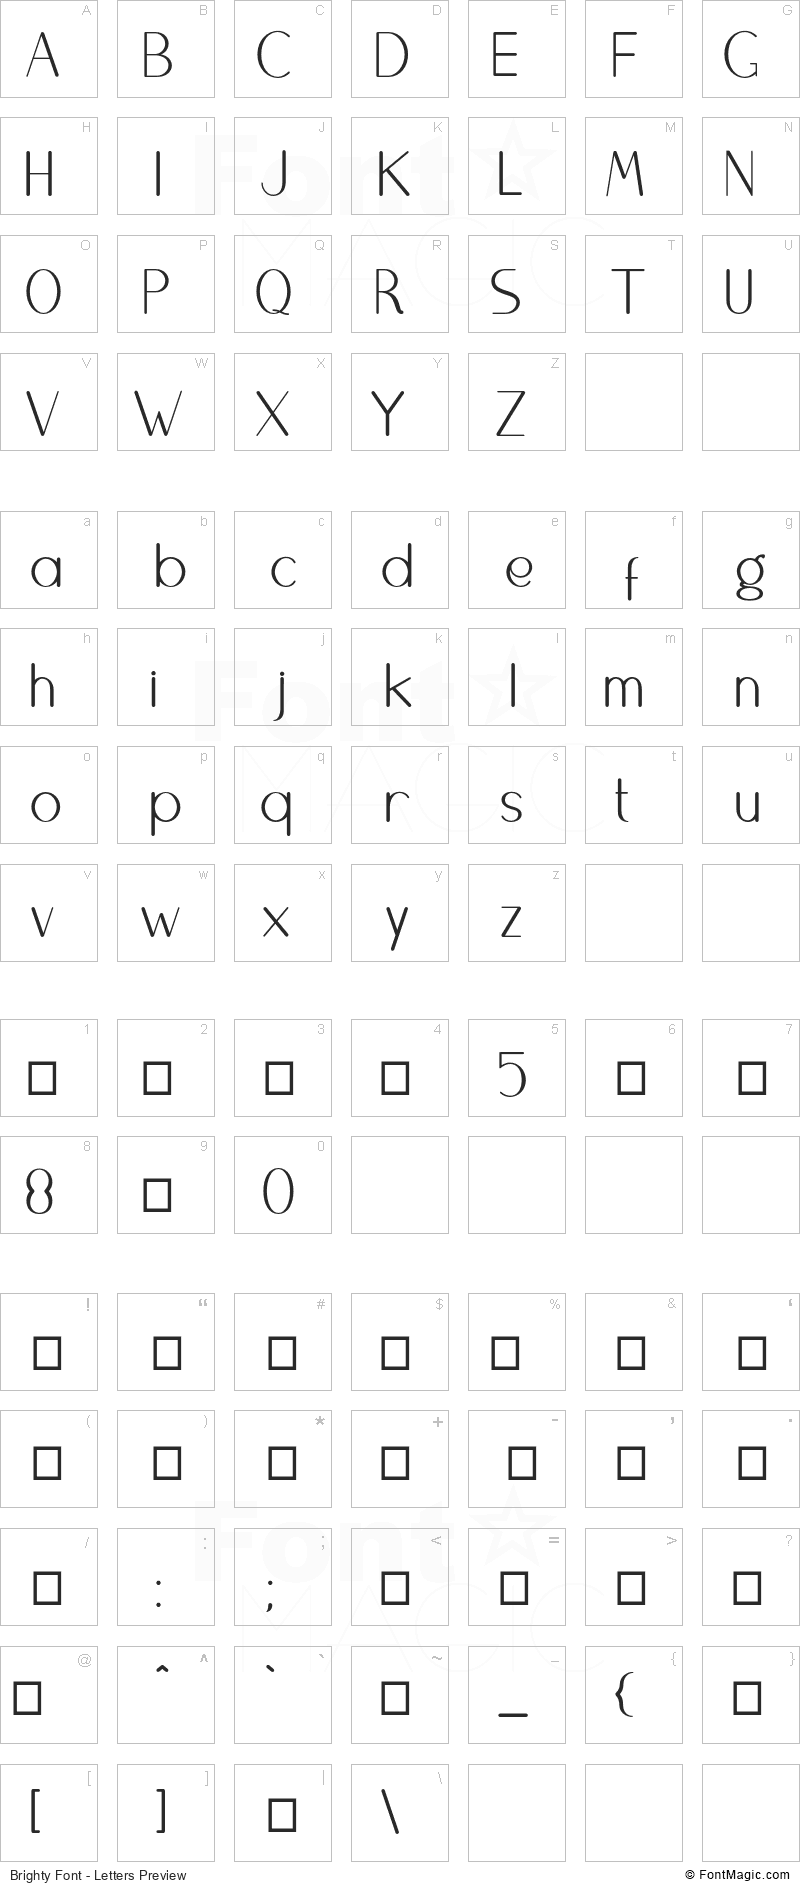 Brighty Font - All Latters Preview Chart